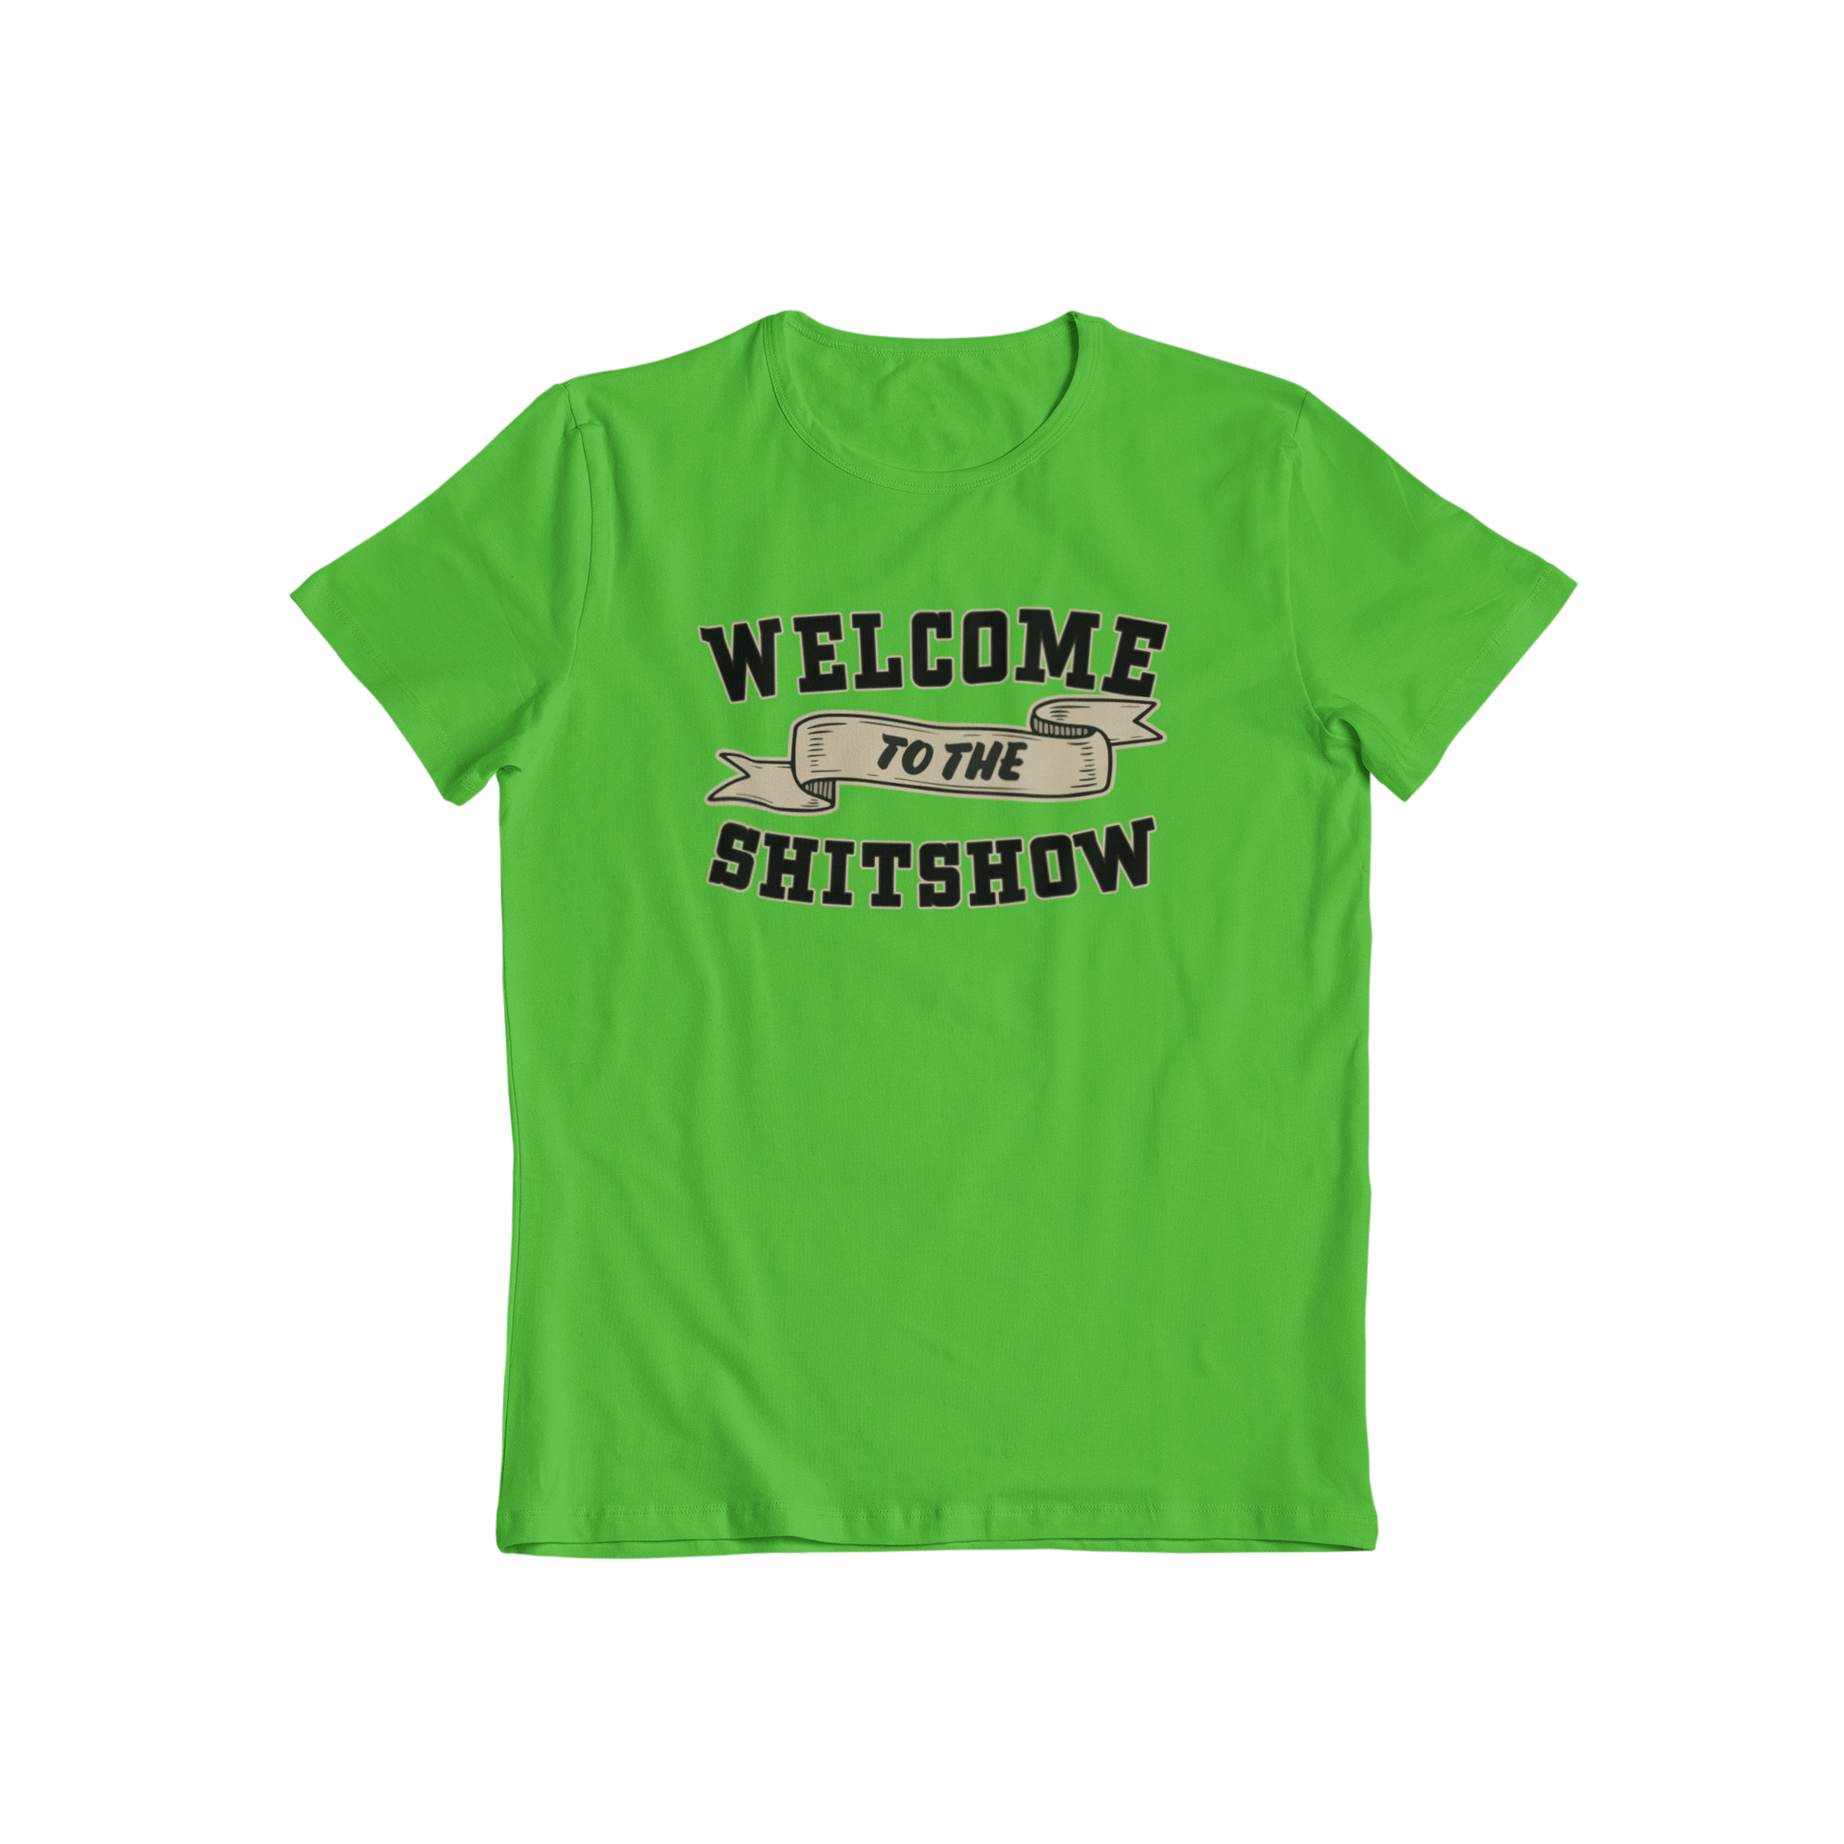 Welcome to the ultimate wardrobe essential! Our Welcome To T-shirt will have you feeling equal parts sassy and stylish. Made from high-quality fabric, this classic slogan t-shirt features a bold statement that perfectly describes modern life. Let this shirt do the talking (or arguing) for you!